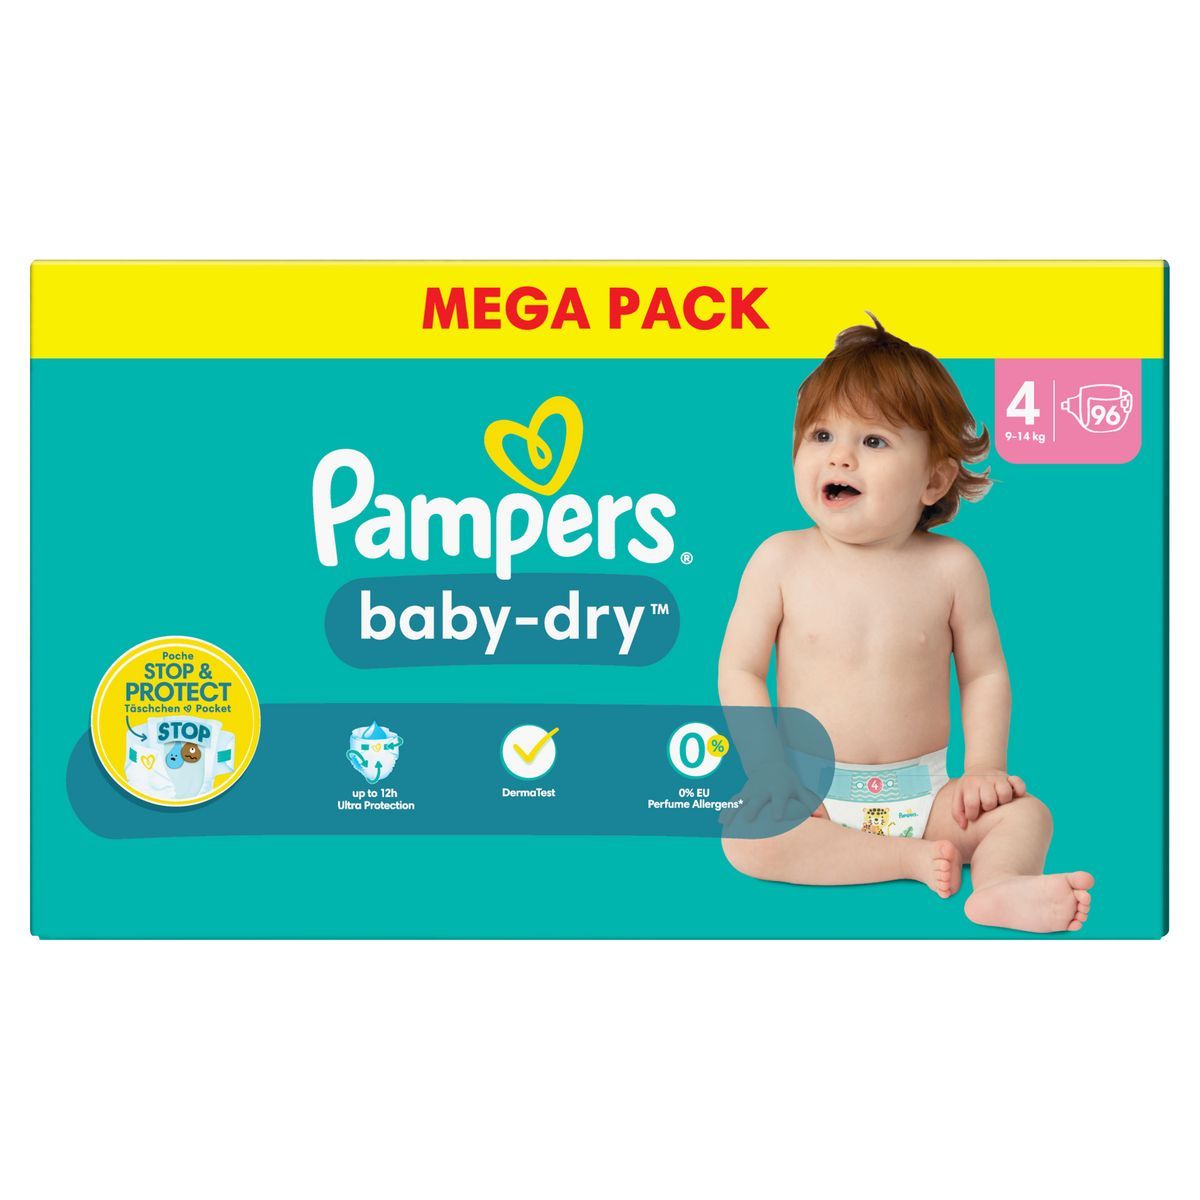  CHANGES BABY DRY MÉGA PAMPERS